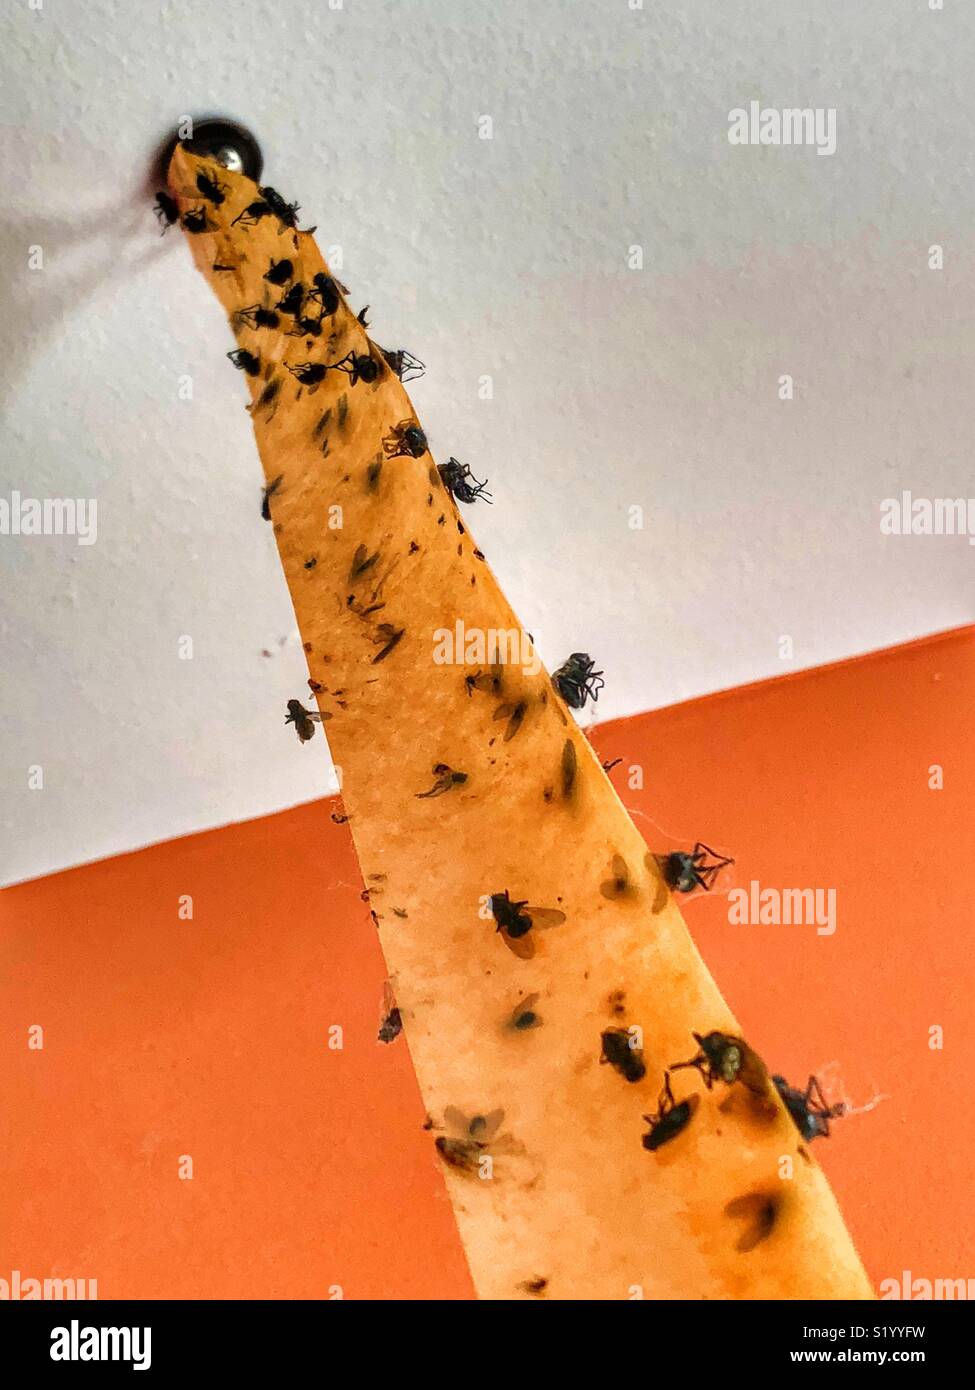 Looking up at dead house flies on a sticky flytrap hanging from ceiling Stock Photo